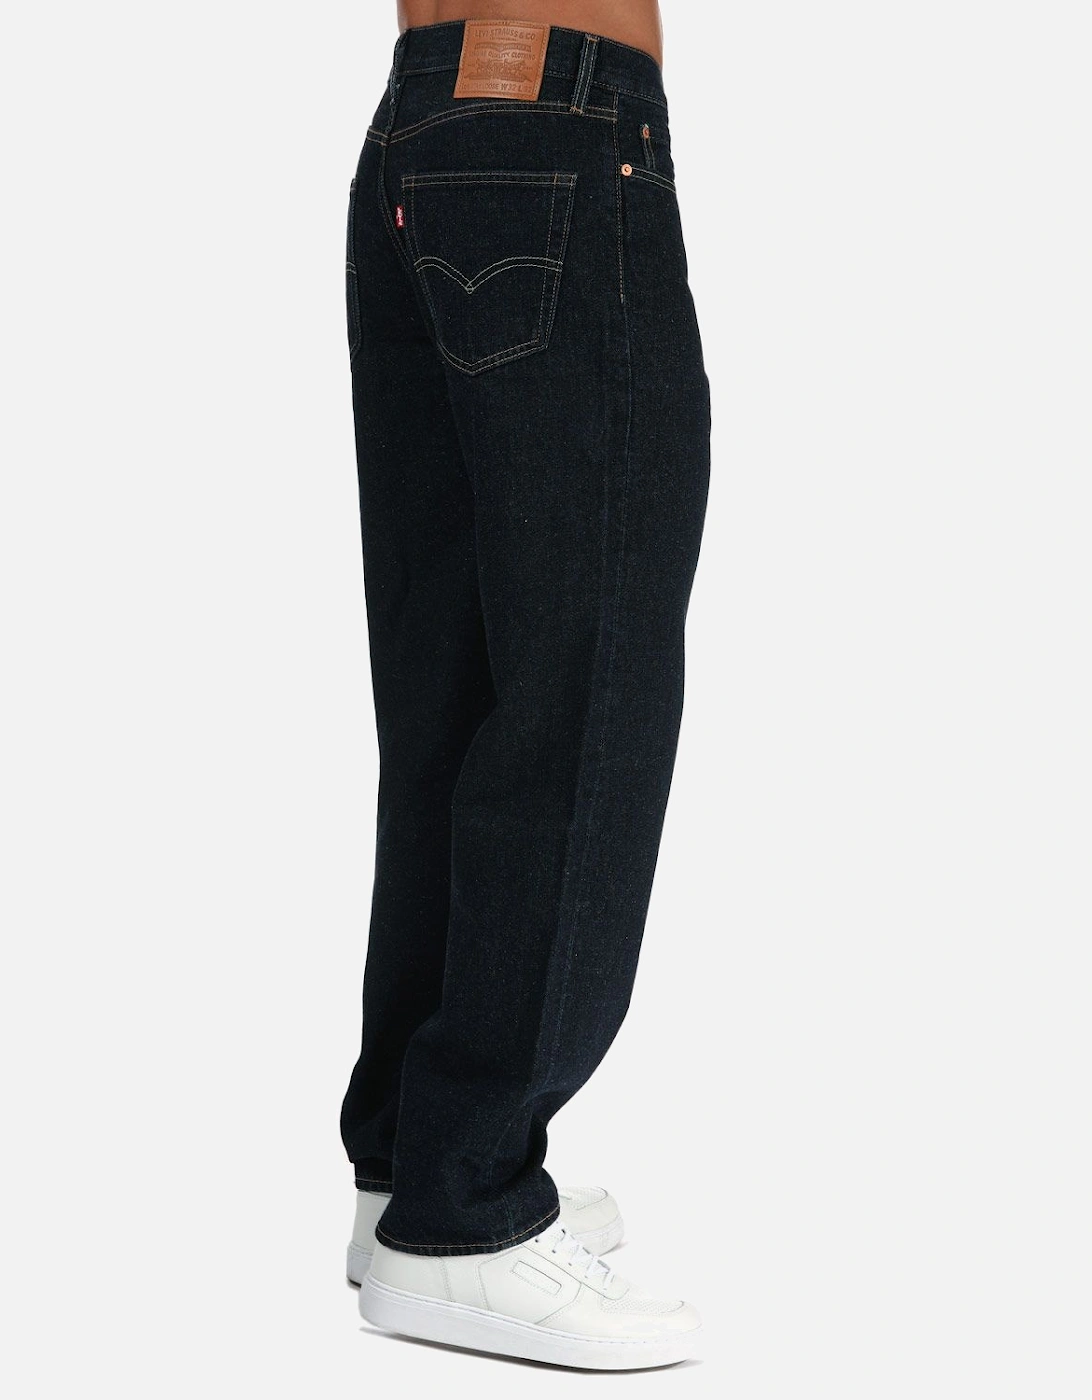 Mens Stay Loose Spotted Road Jeans